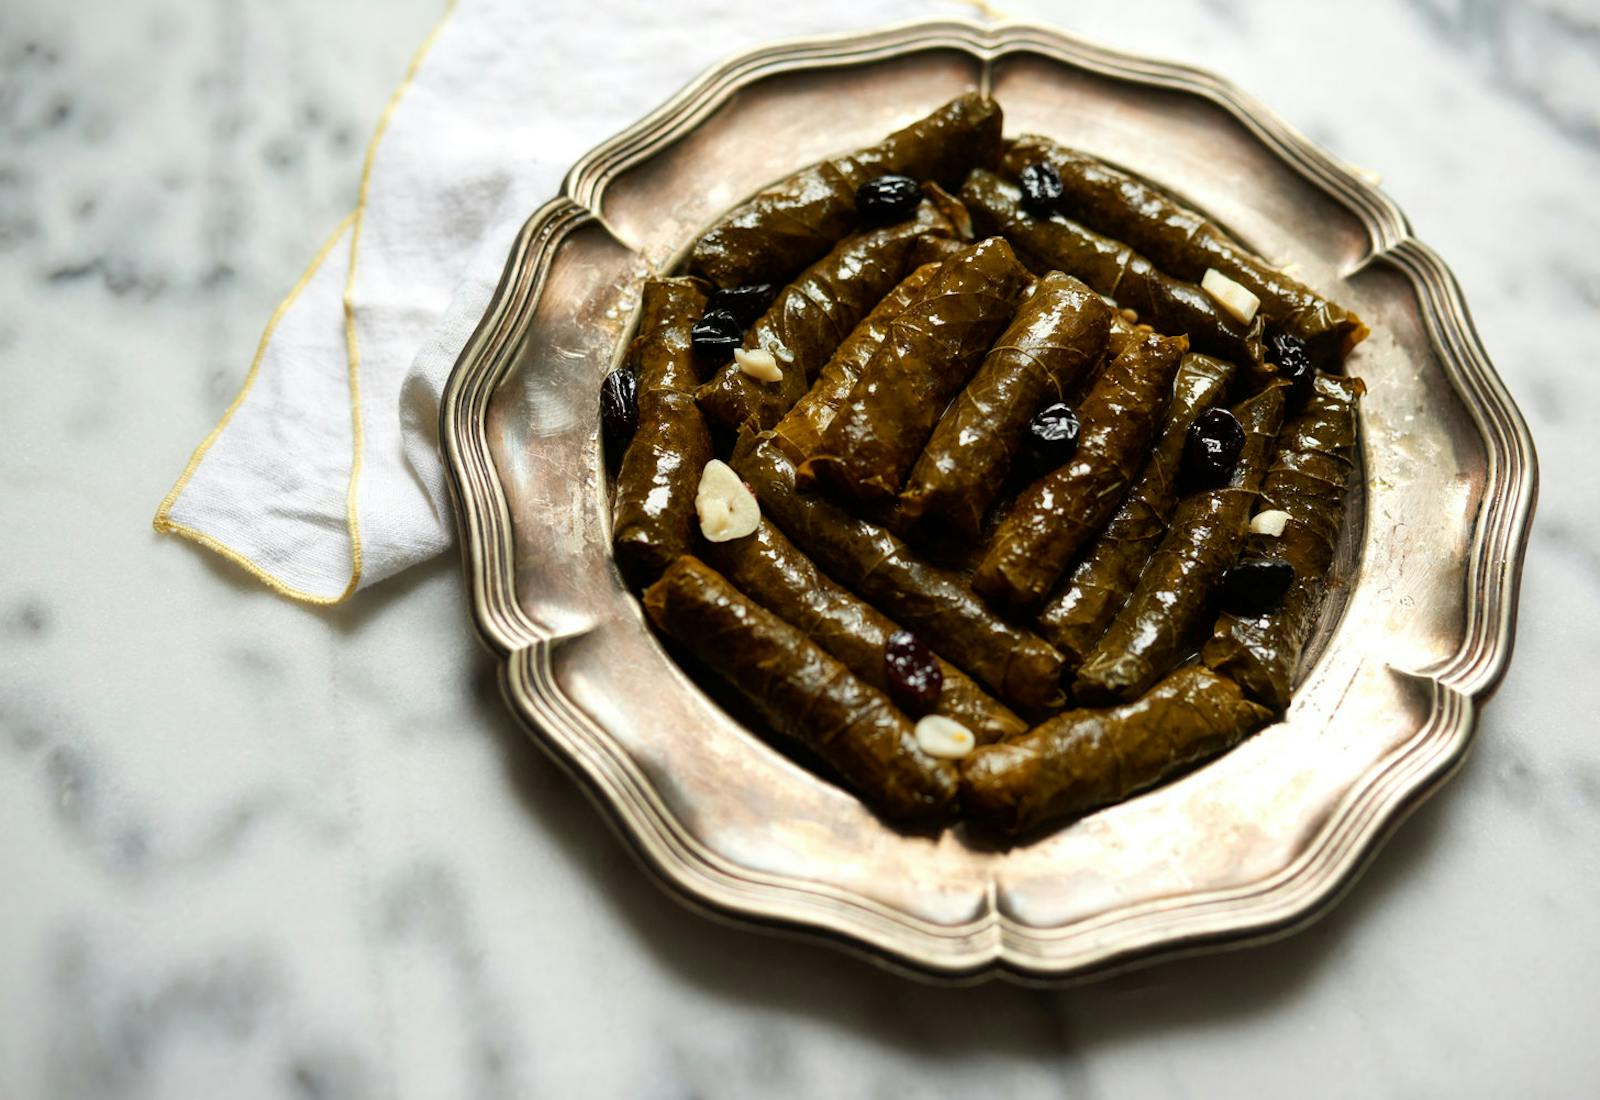 Stuffed grape leaves with slivered garlic and raisins on scalloped metal plate atop marble table.